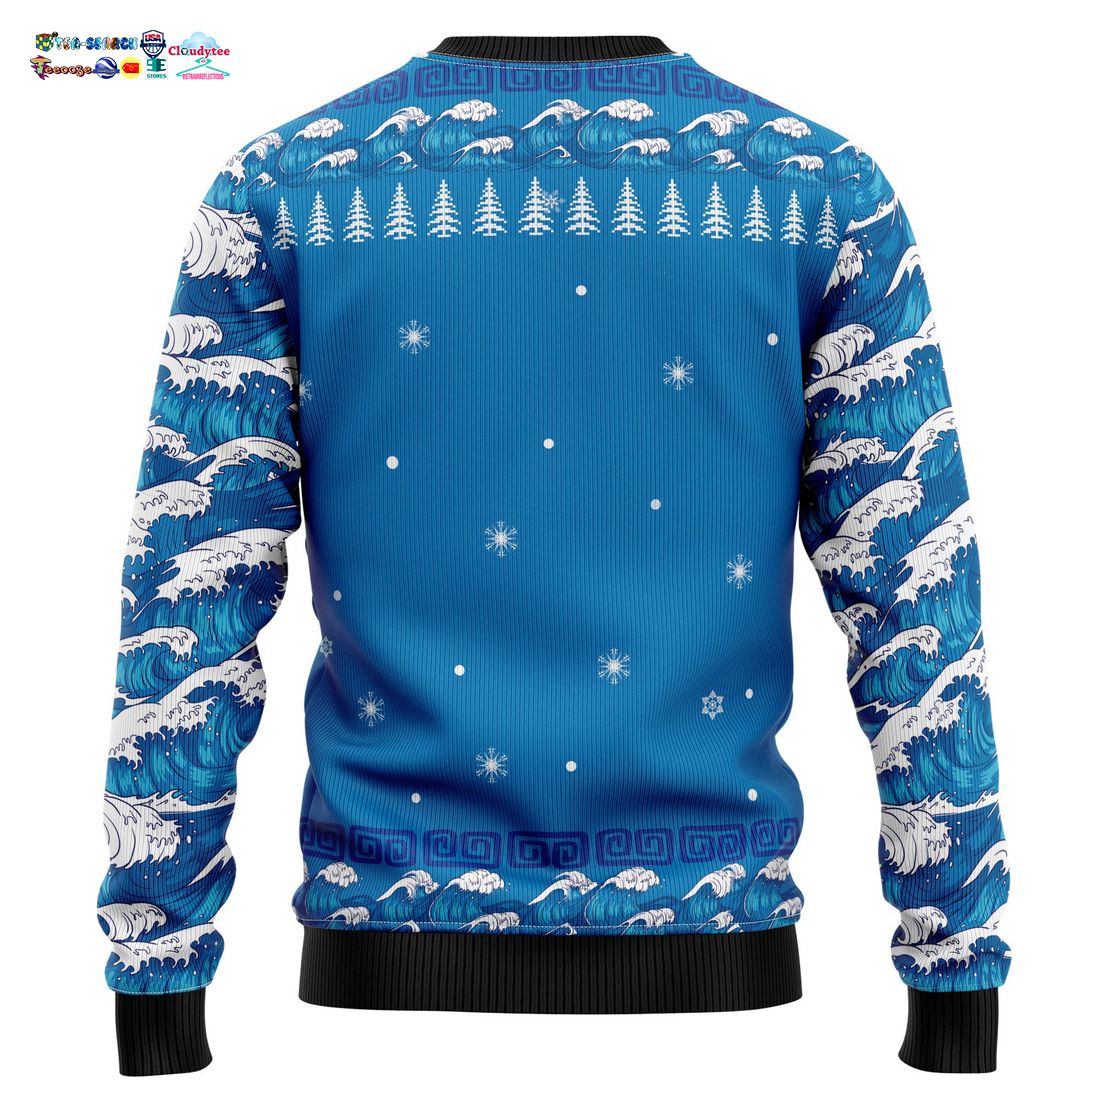 Surfboard Have A Swell Christmas Ugly Christmas Sweater